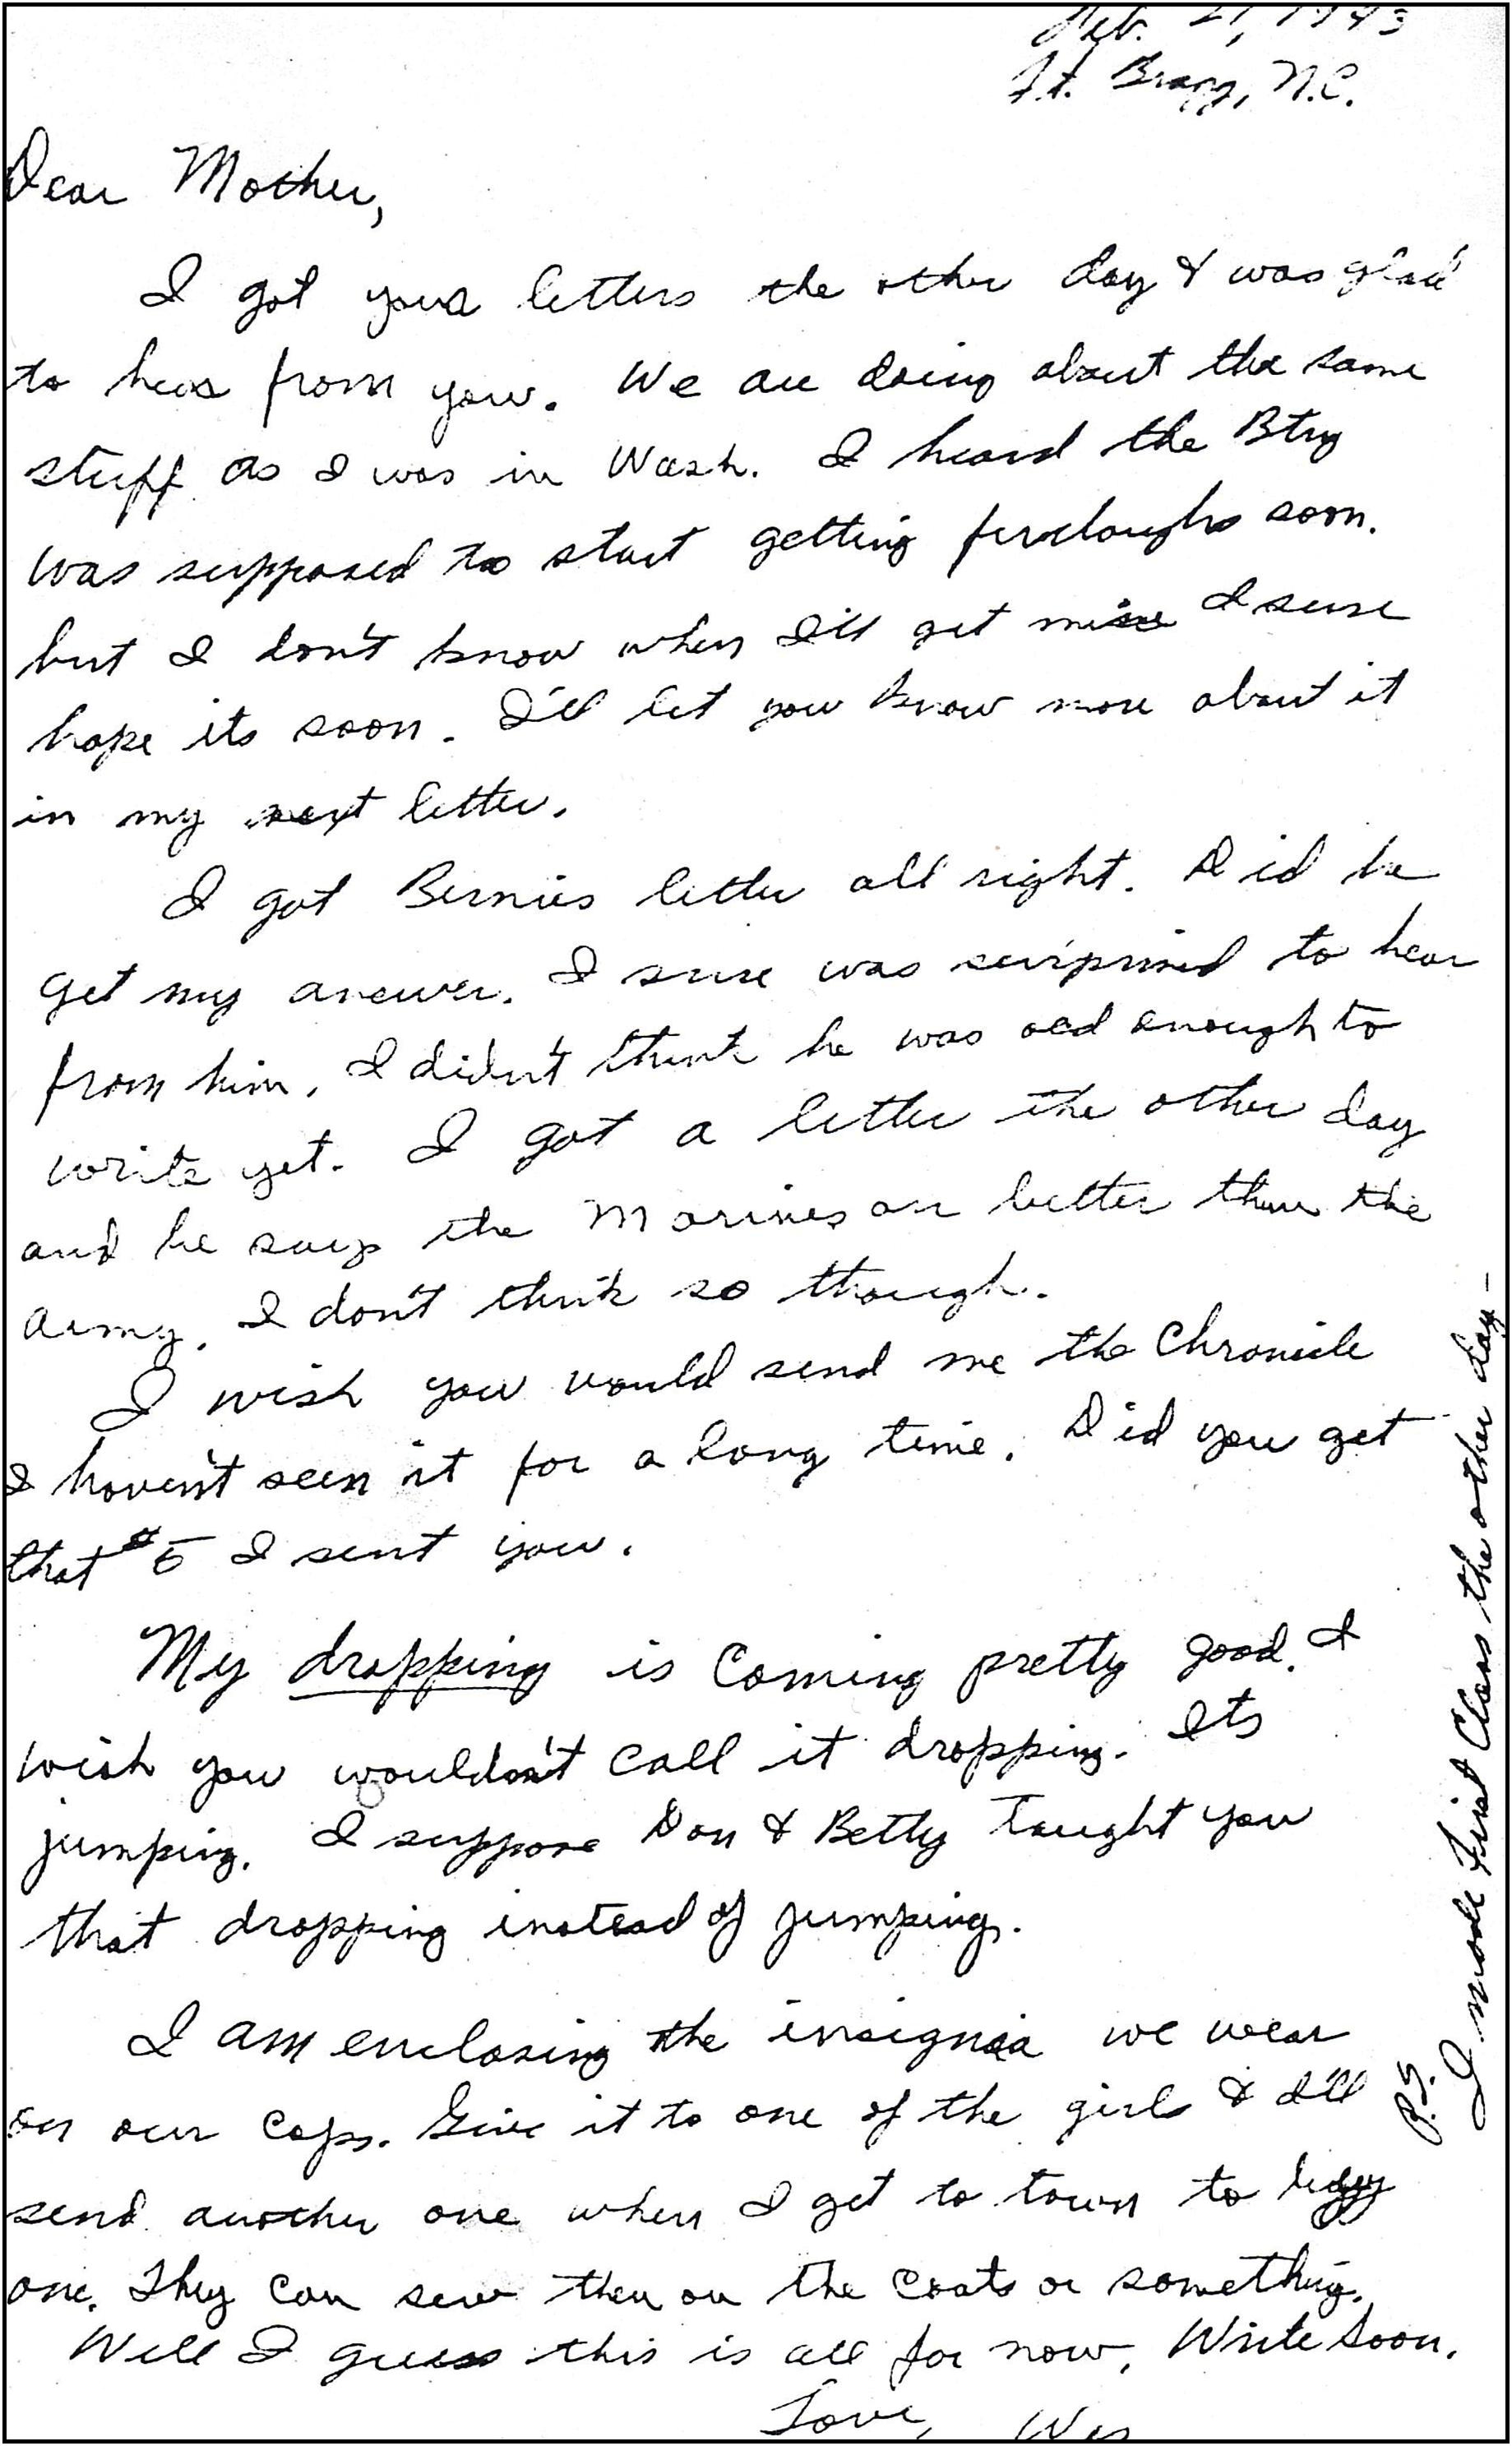 Letter to home during training.